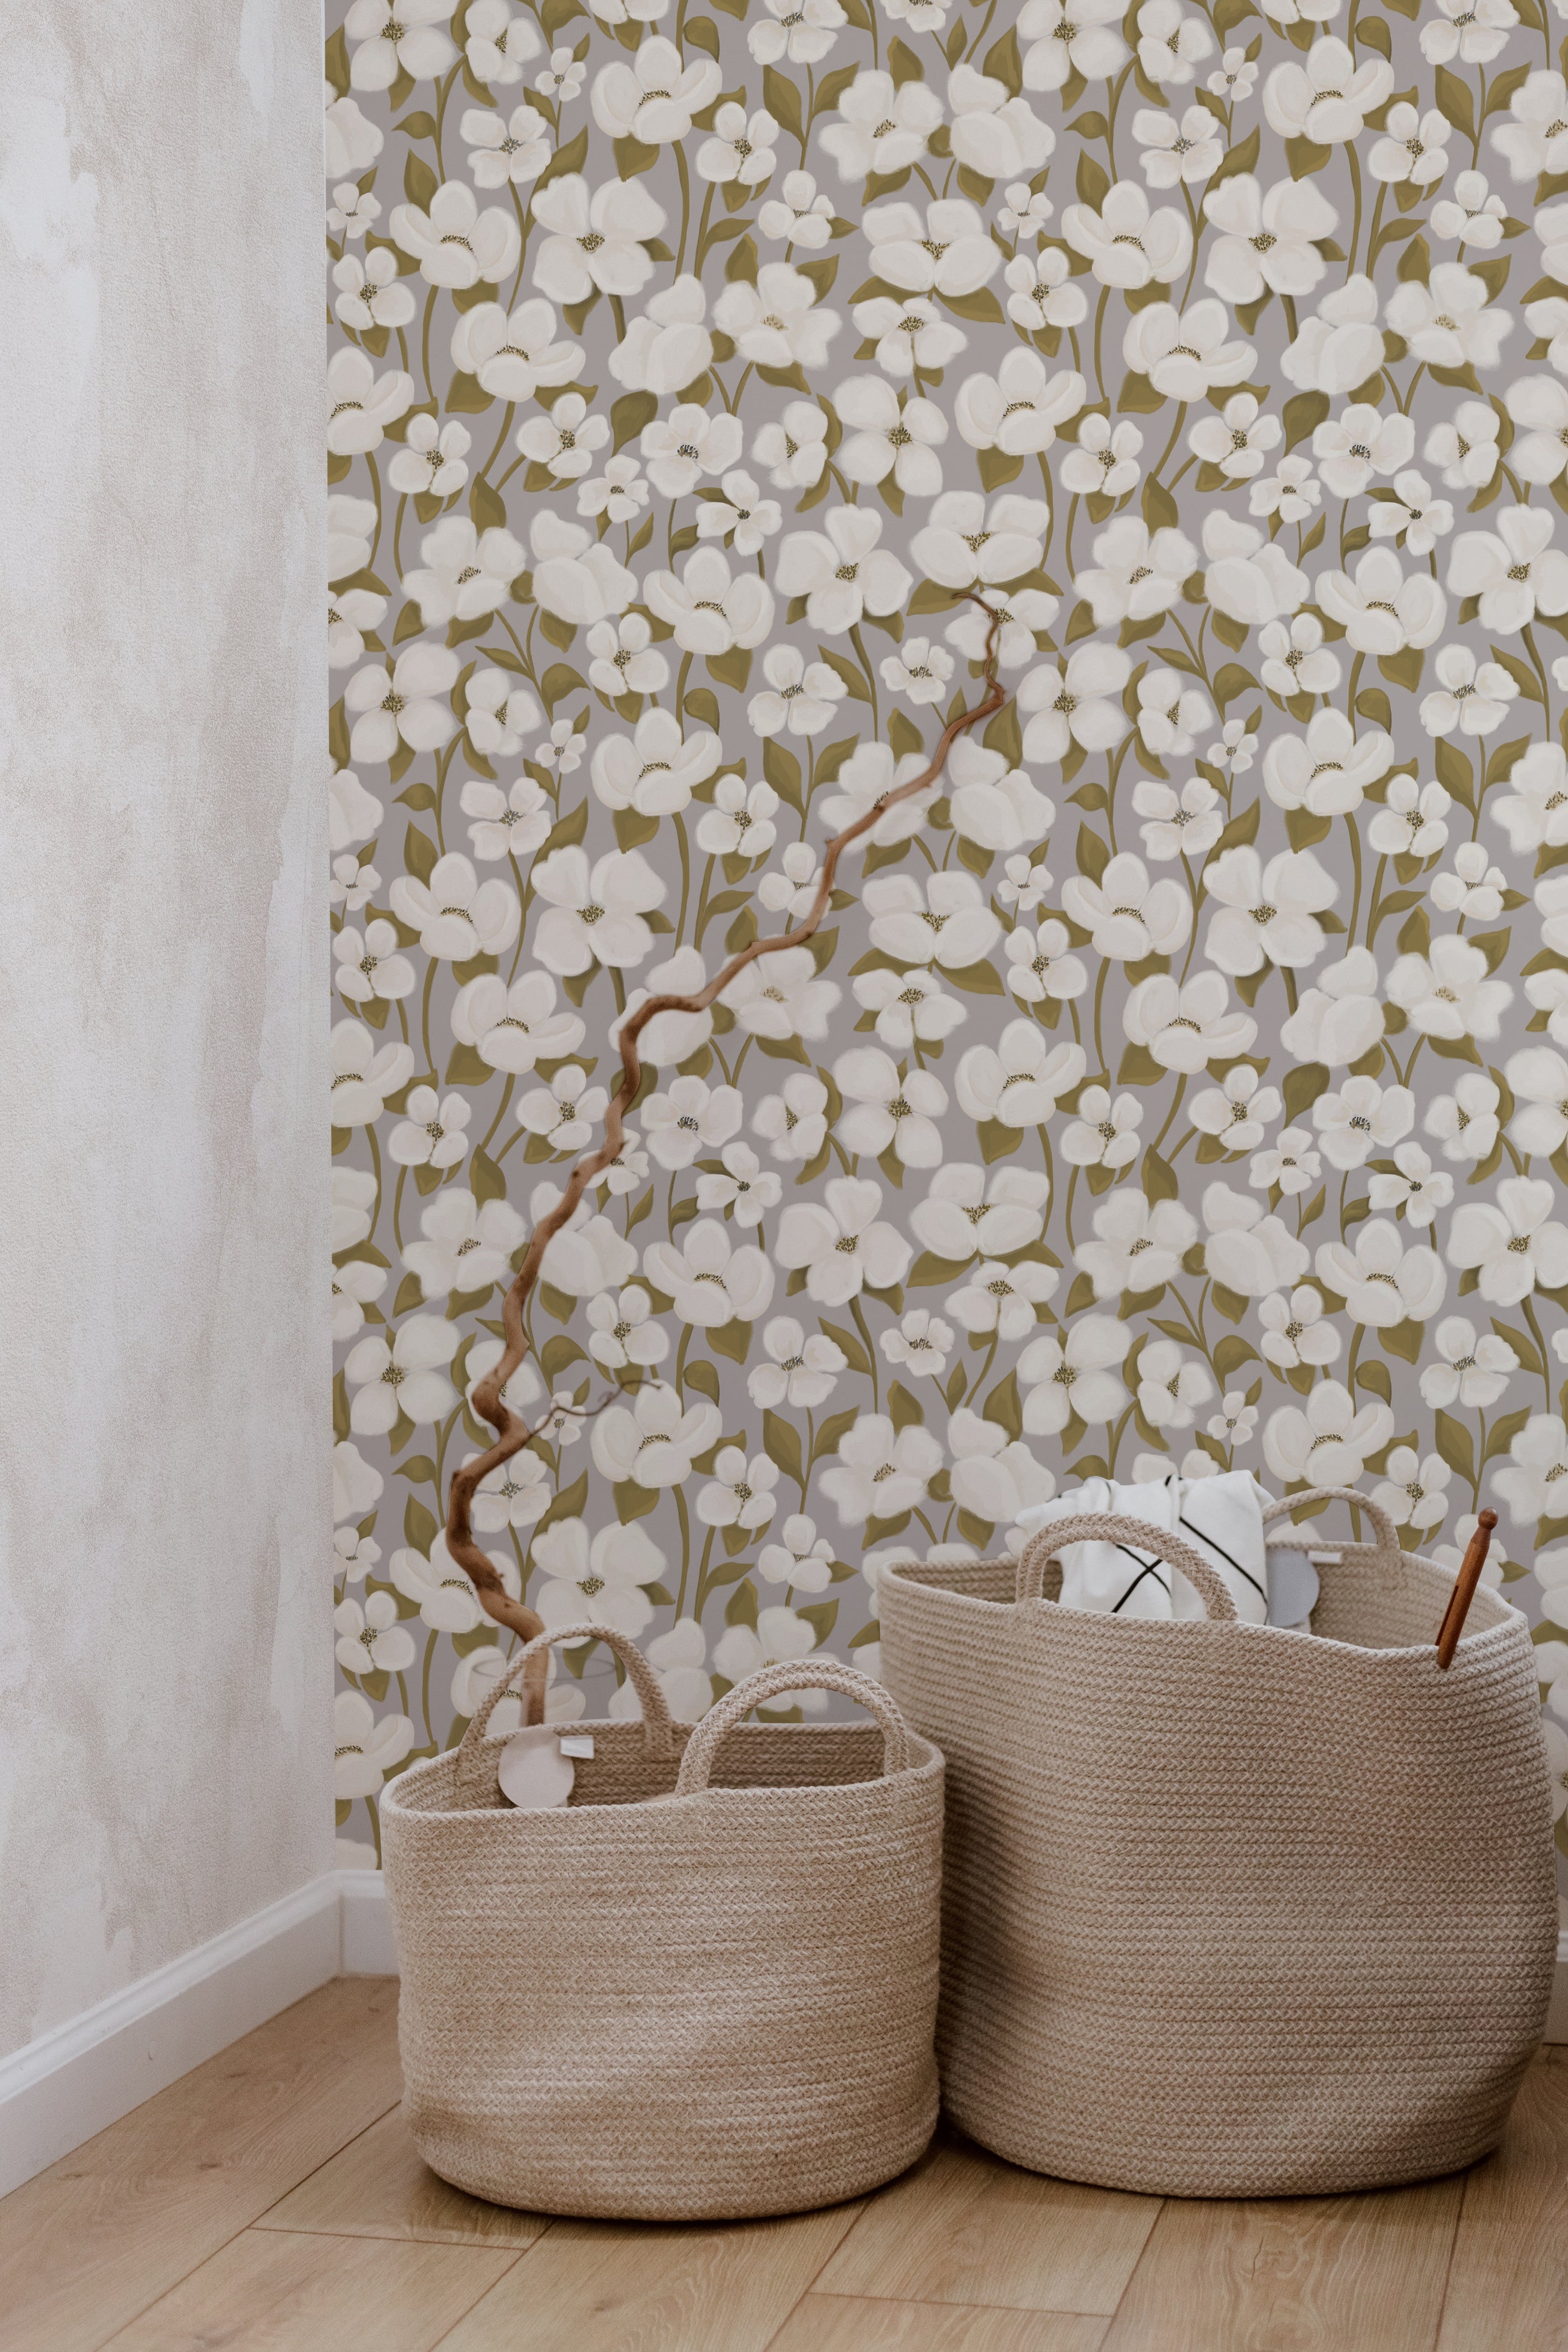 Interior scene with White Fleur Wallpaper featuring clusters of white flowers on slender branches, set against a muted olive background, complemented by two wicker baskets in the foreground.